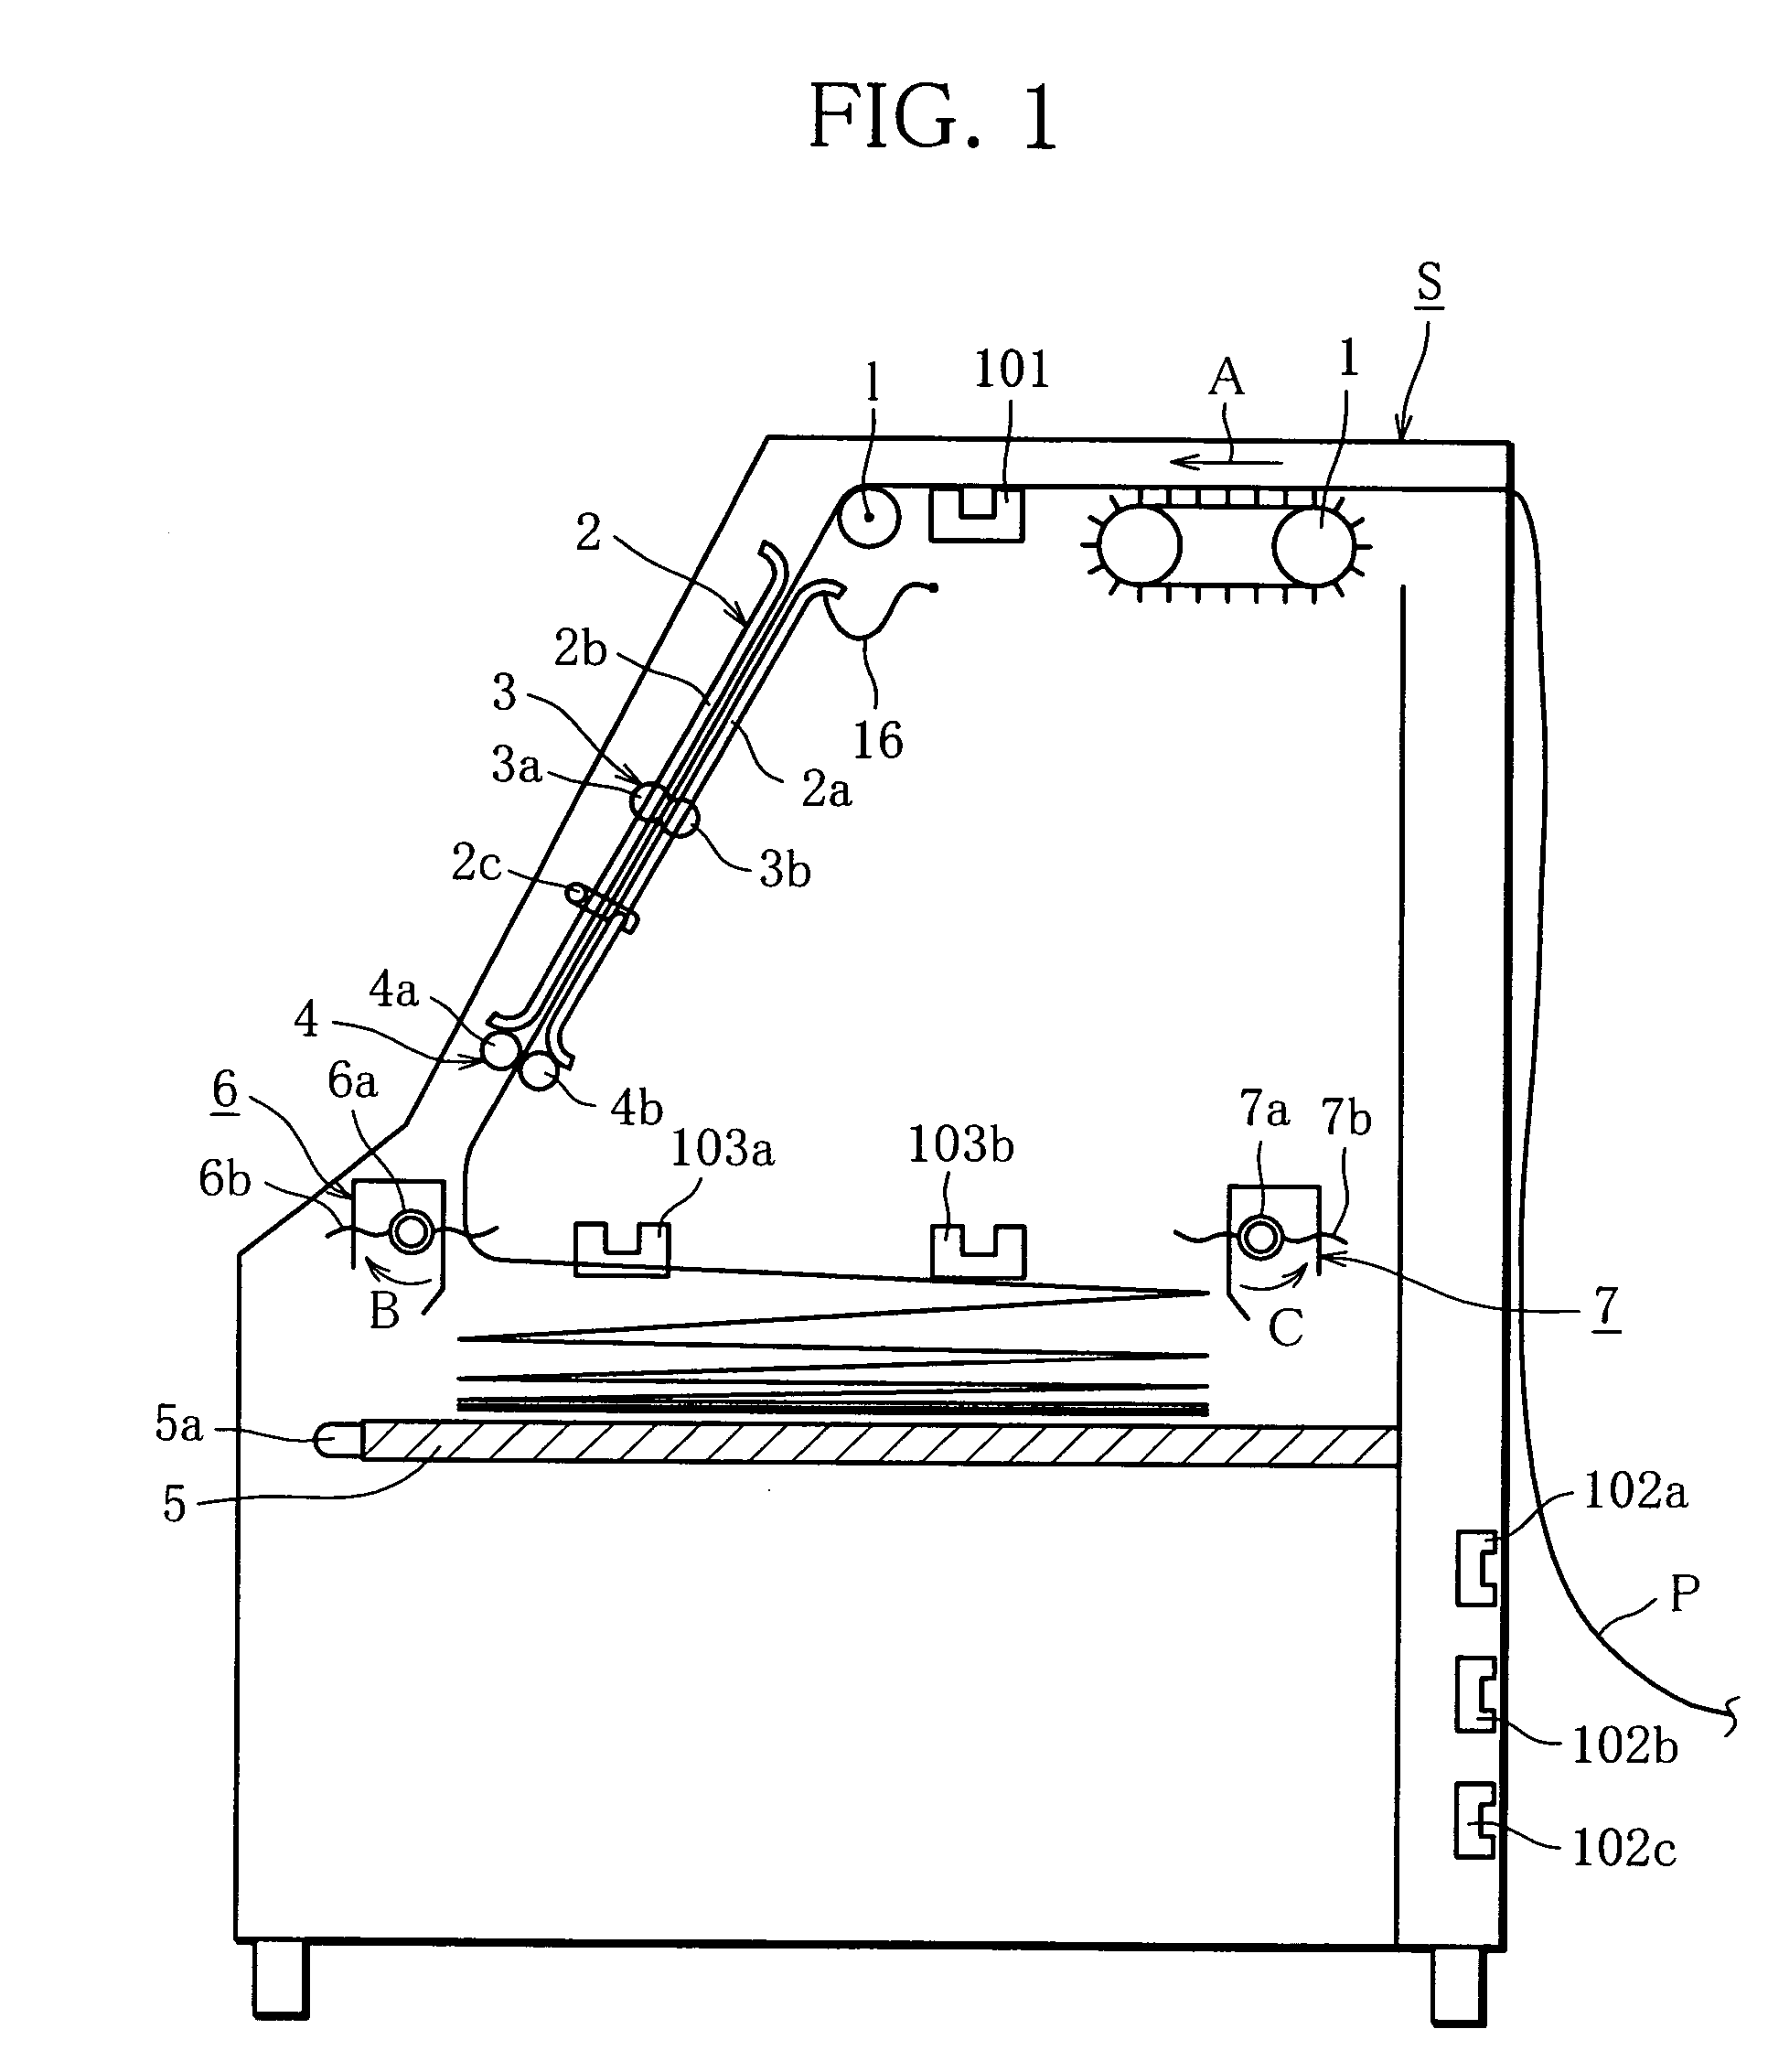 Folding device and printing system